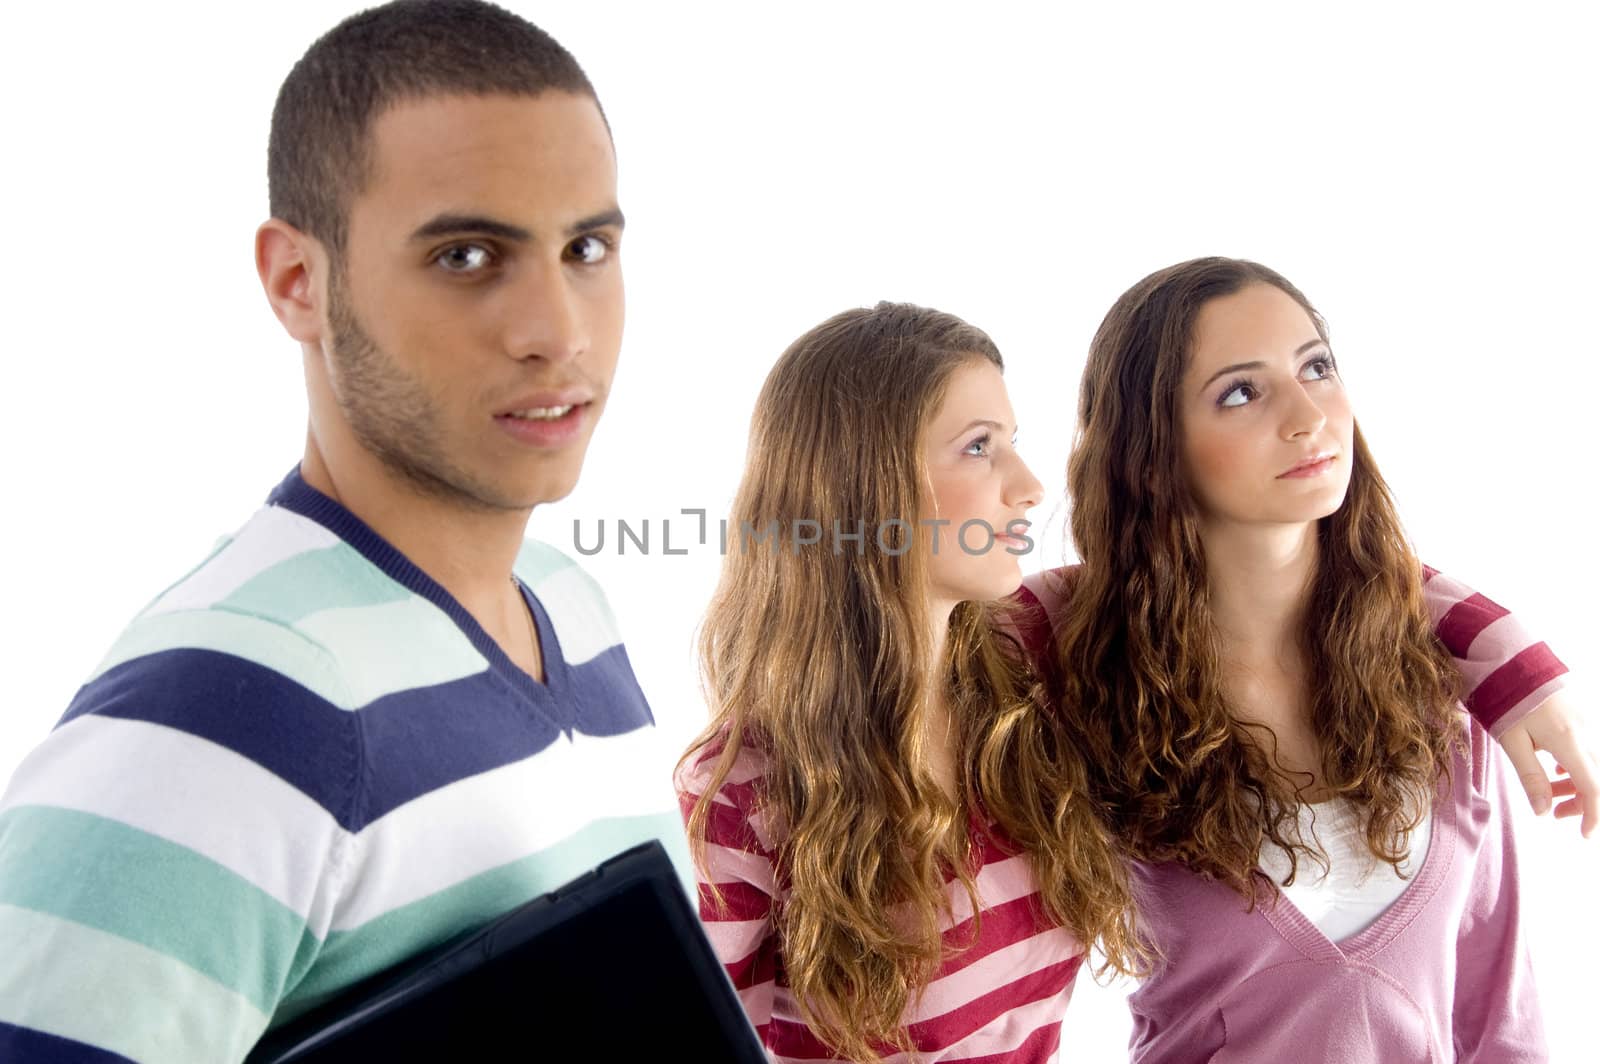 two girls holding each other and guy looking at camera against white background